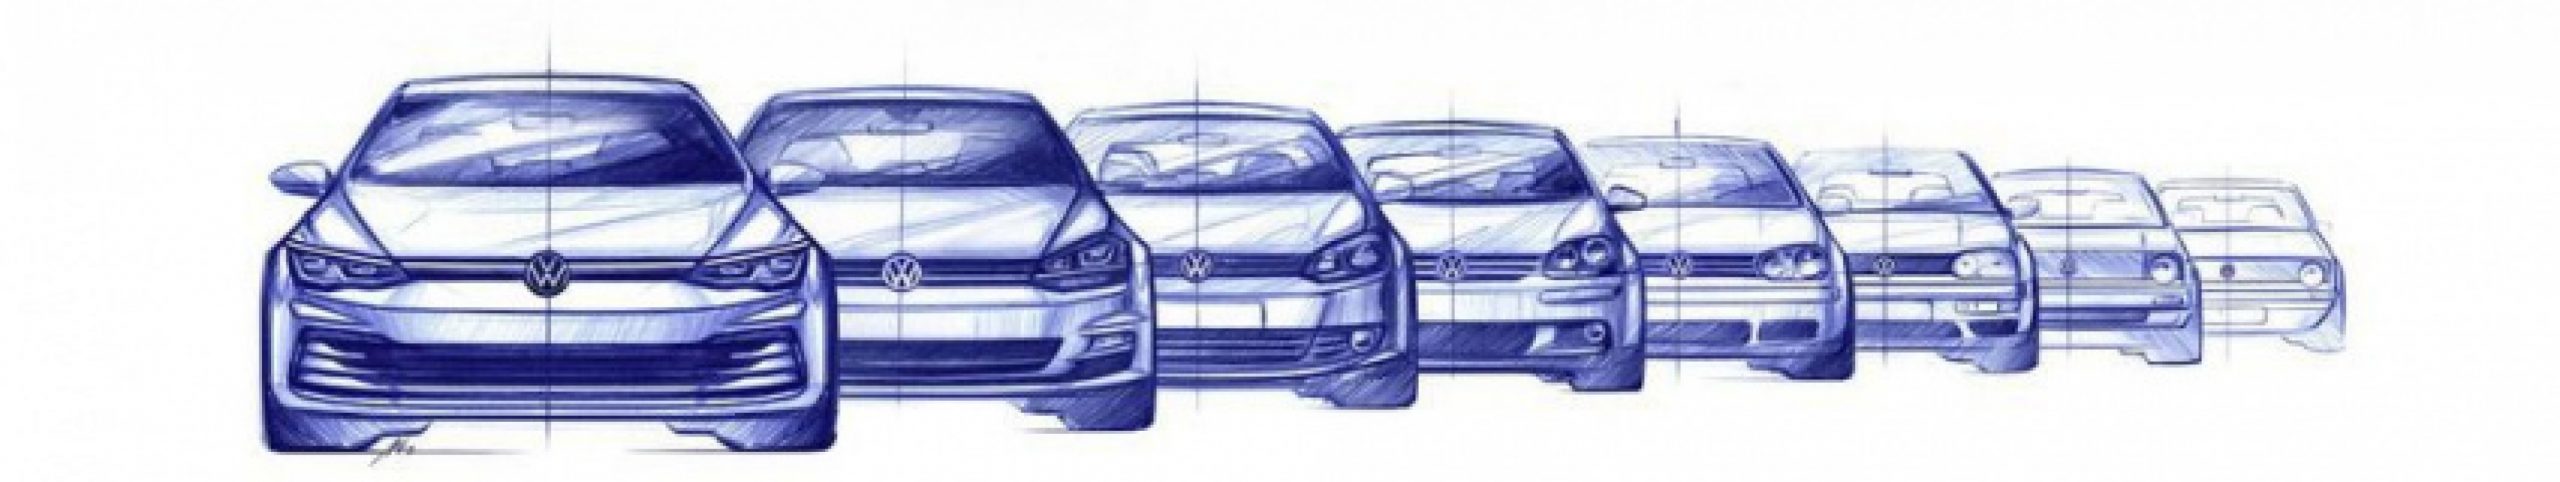 autos, cars, volkswagen, auto news, golf, golf gti, golf mk8, golf r, volkswagen golf mk8, volkswagen teases golf mk8 ahead of world premiere later this month